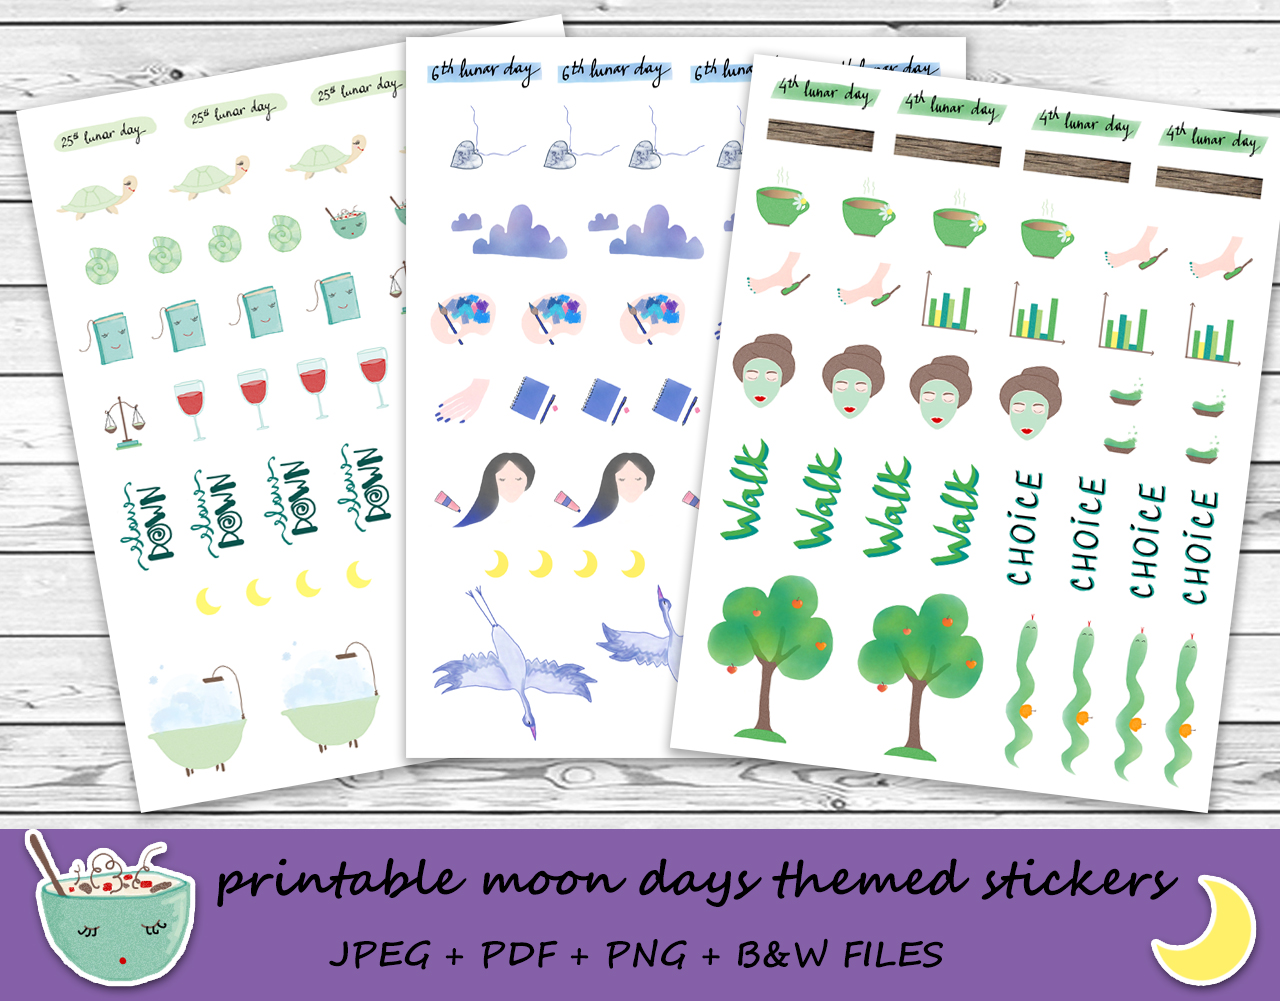 printable moon days themed stickers